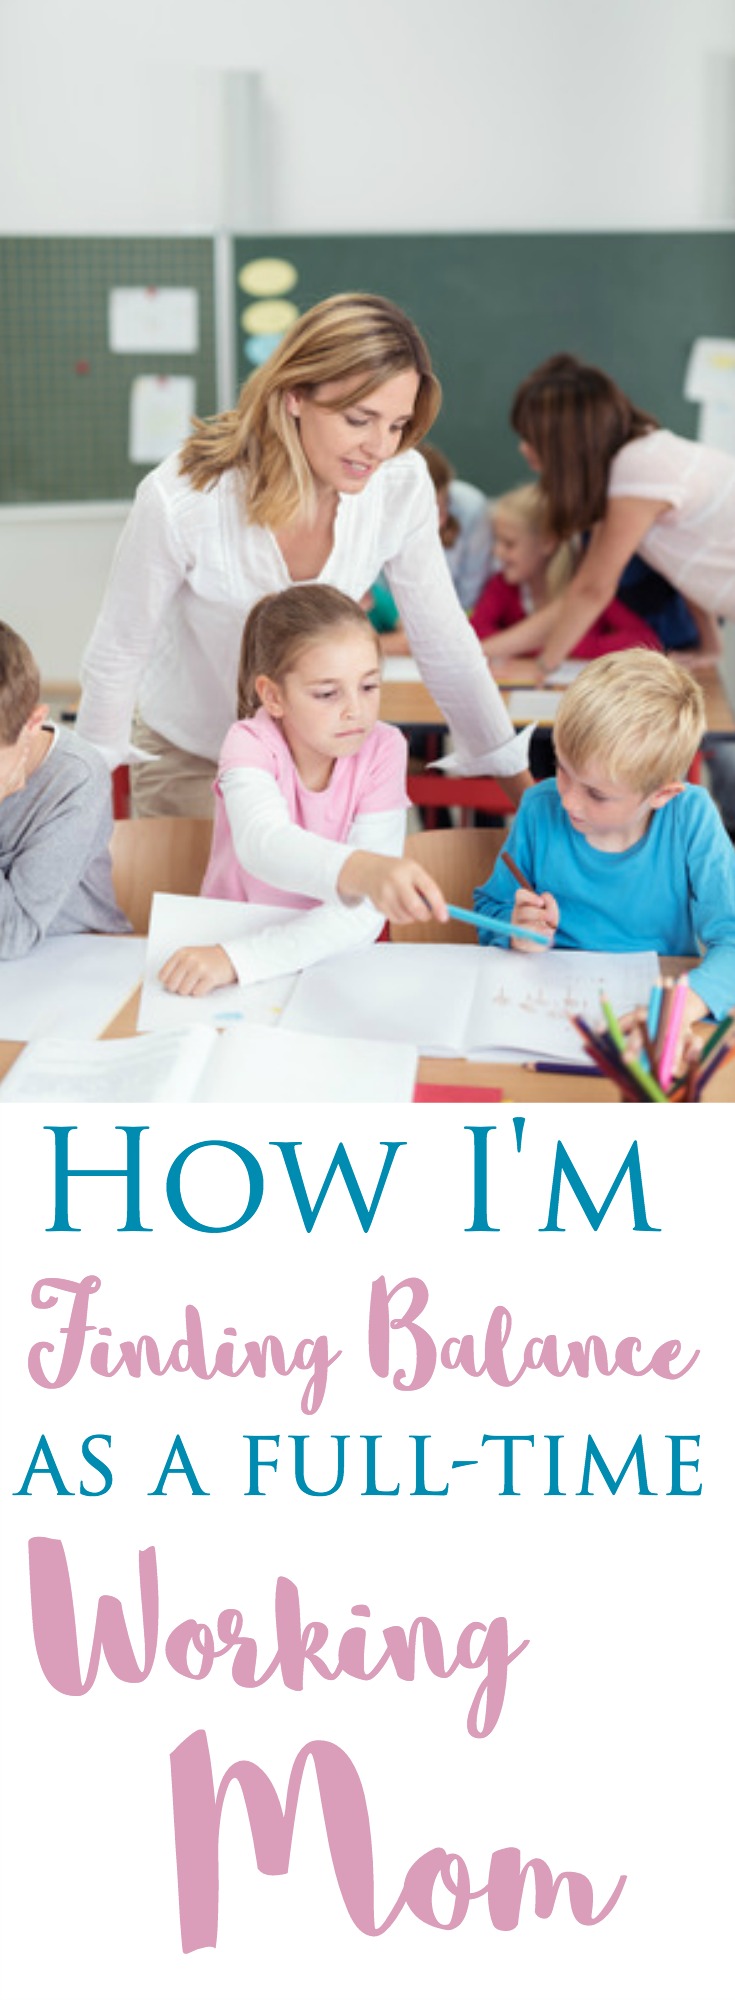 Working Mom in Balance | How I'm living joyfully even though working outside the home isn't my first choice. I'm proud of being a full-time mom and employee!